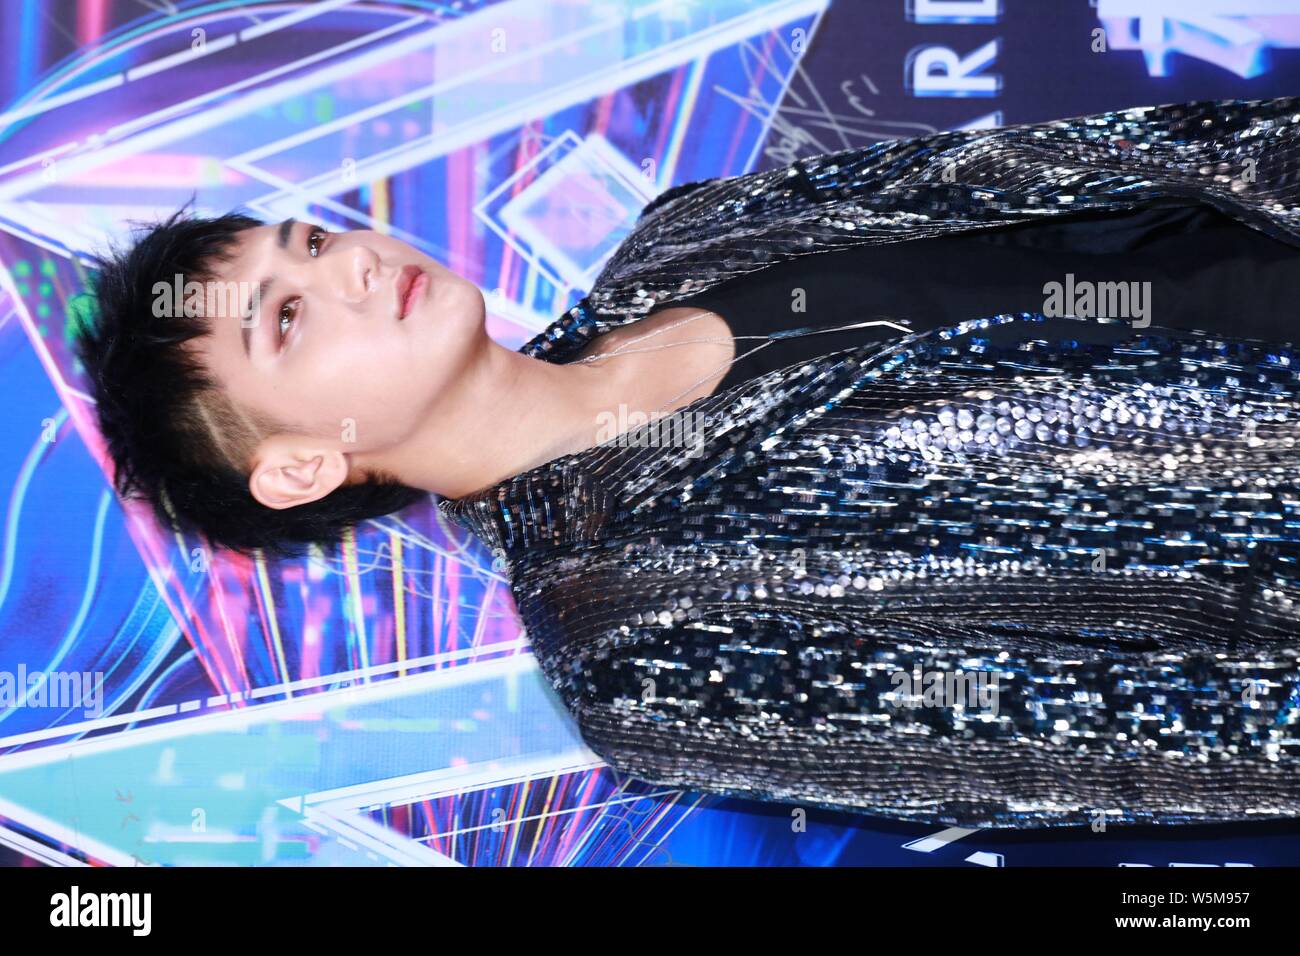 Huang Zitao's Blue Hair: Red Carpet Moments - wide 4